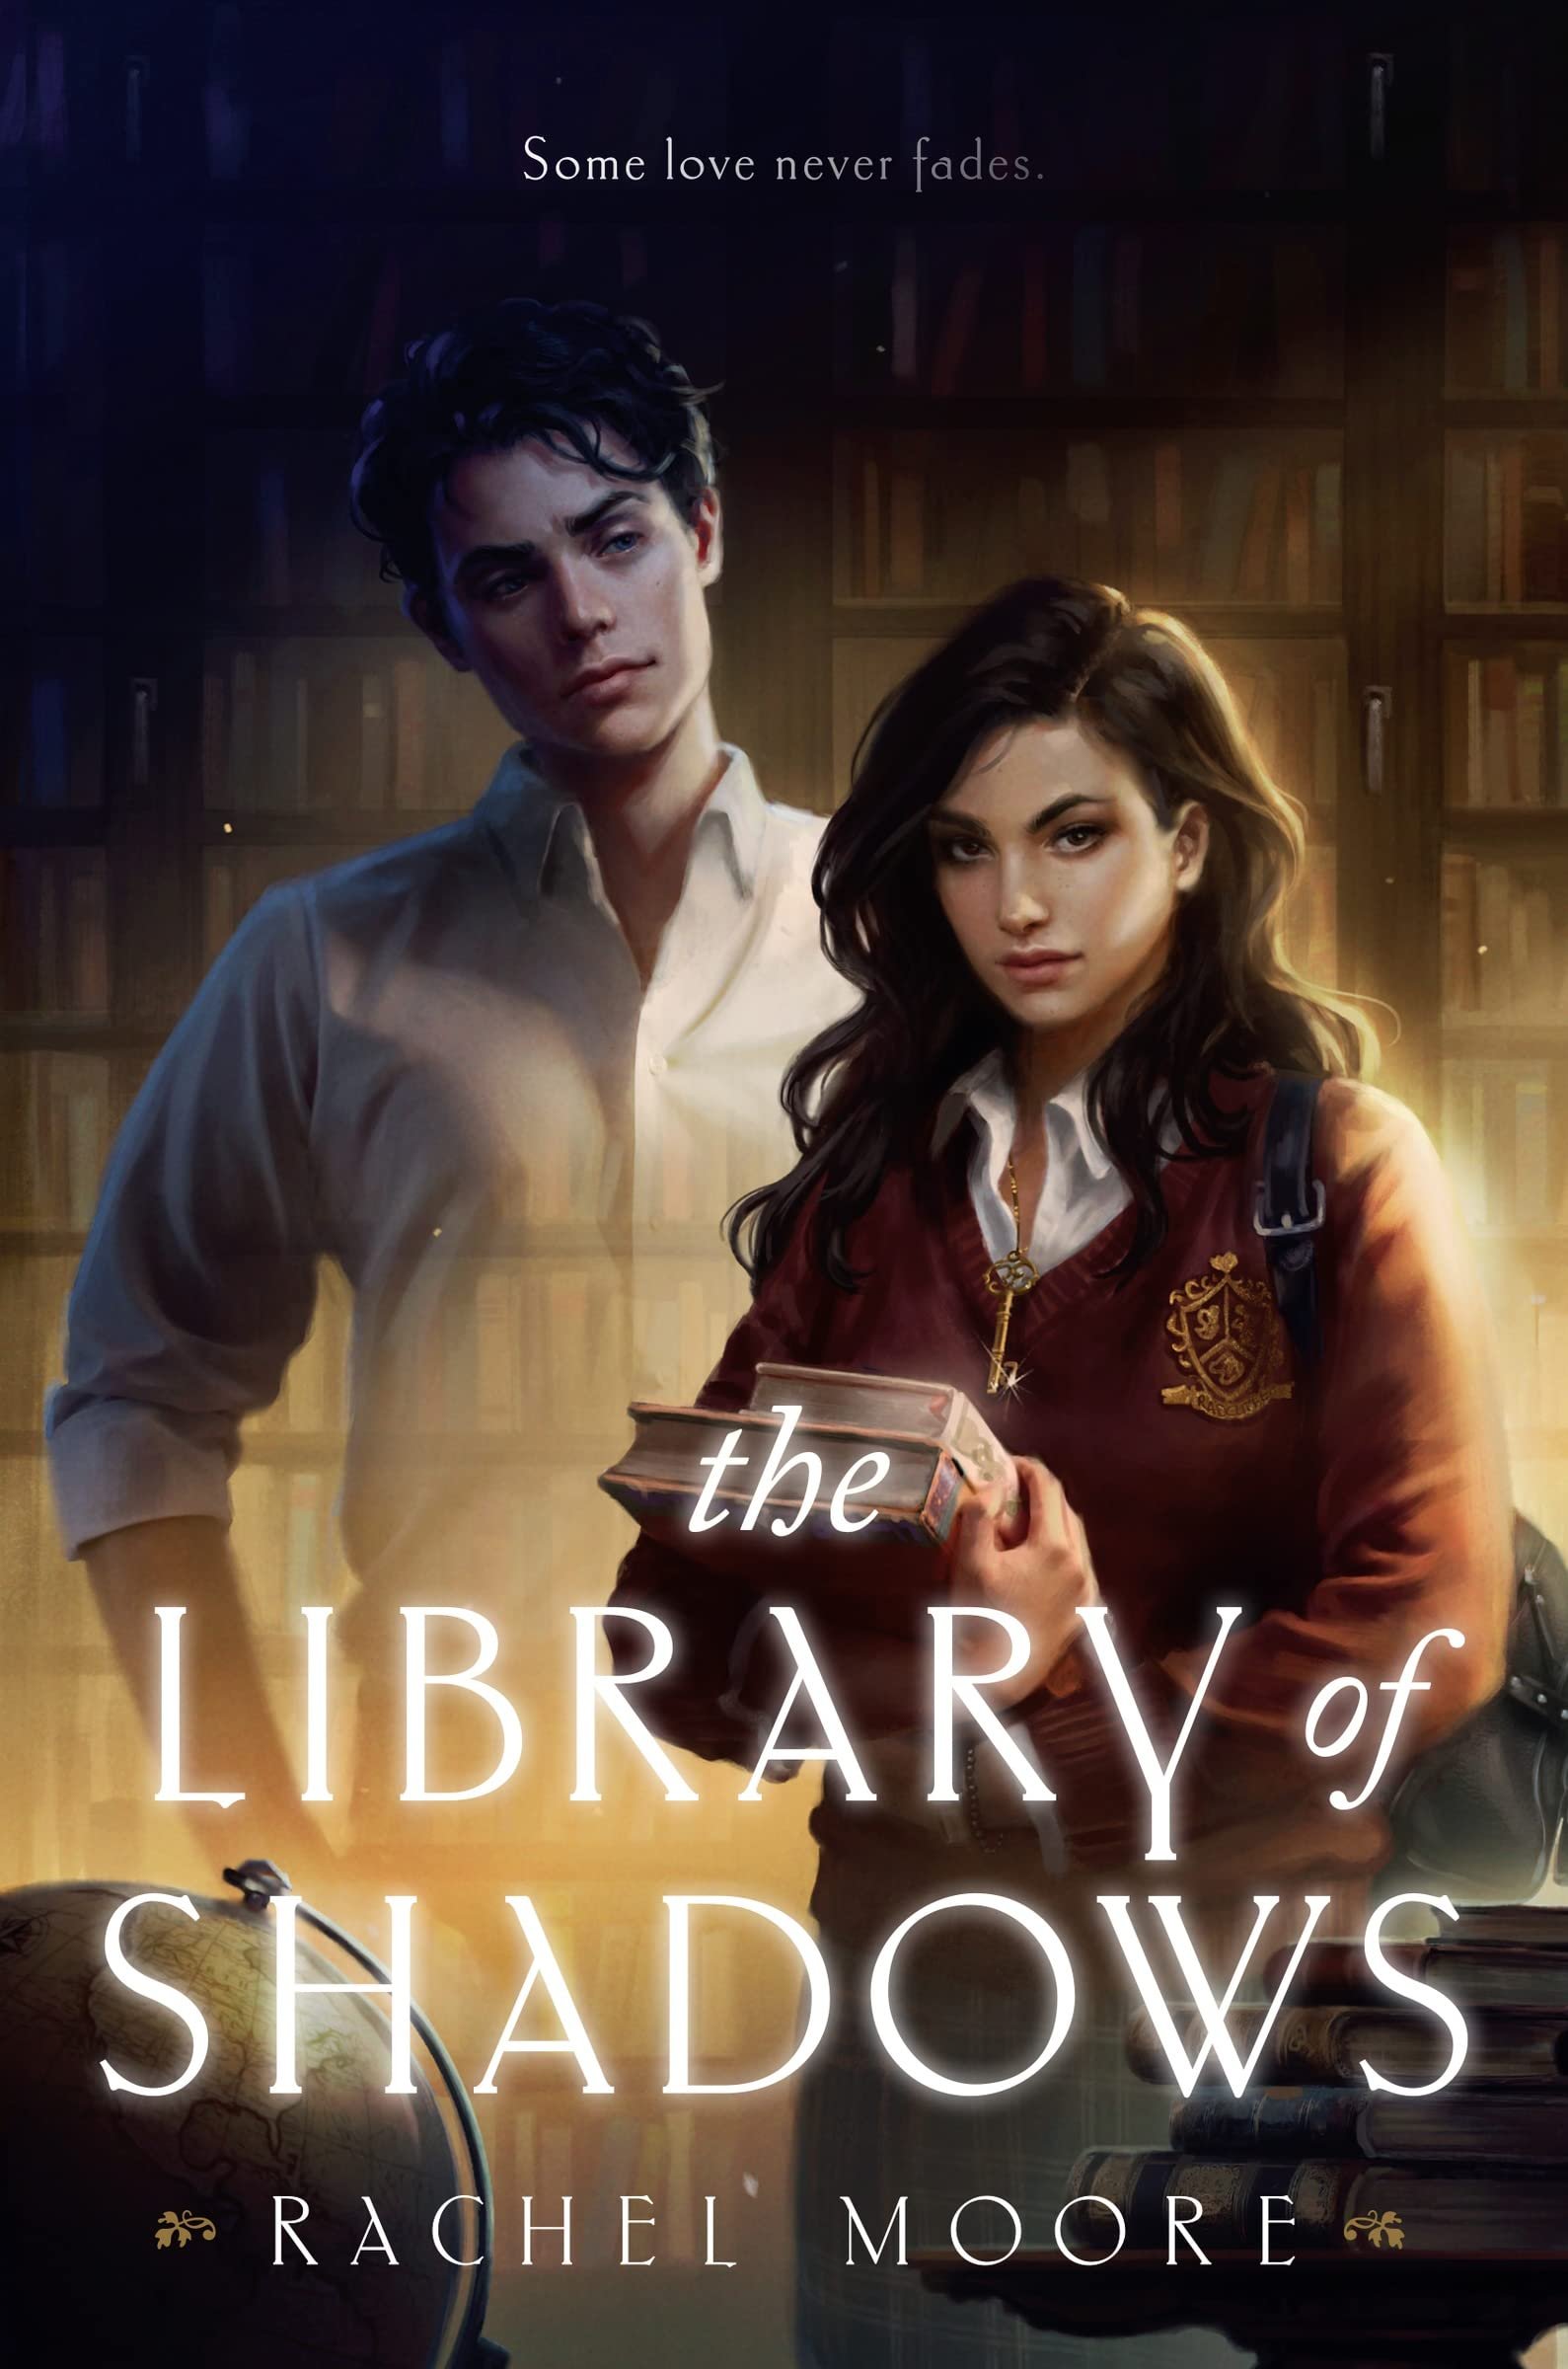 The library of shadows by Rachel Moore.jpg